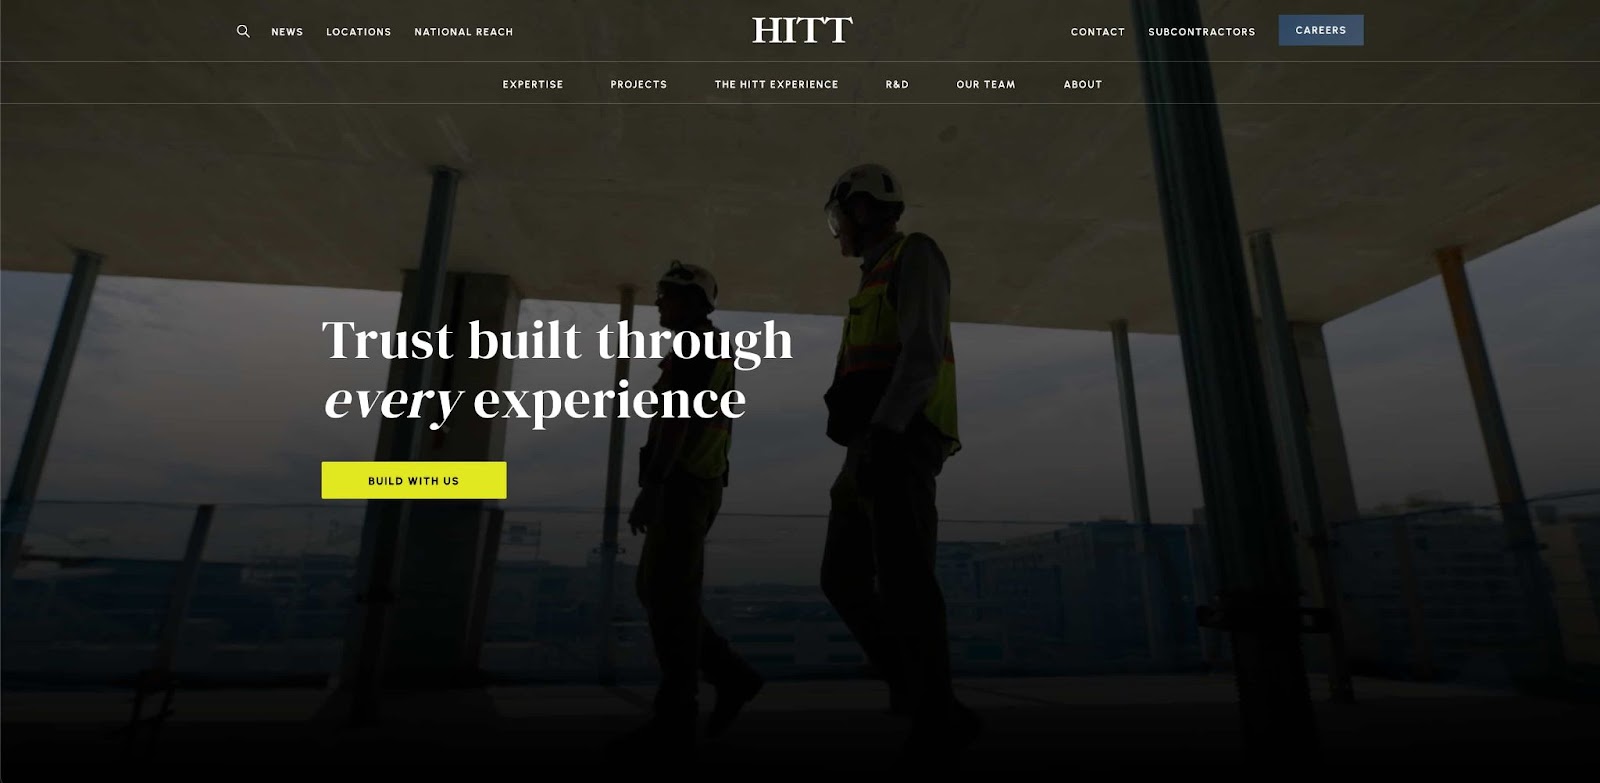 Hitt homepage that says trust built through every experience